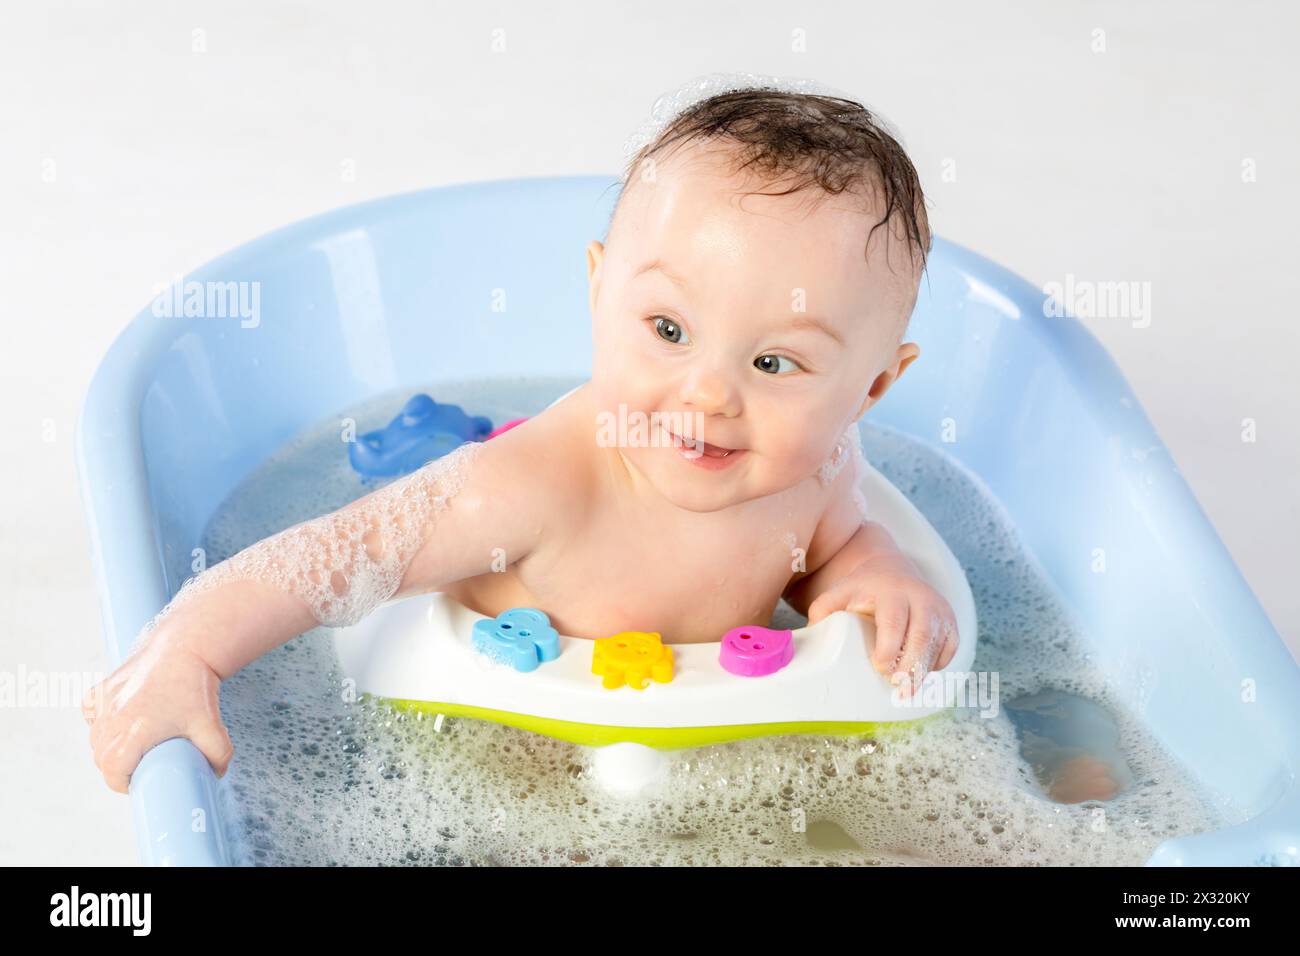 Smiling baby girl bathes in a bathtube with toys Stock Photo